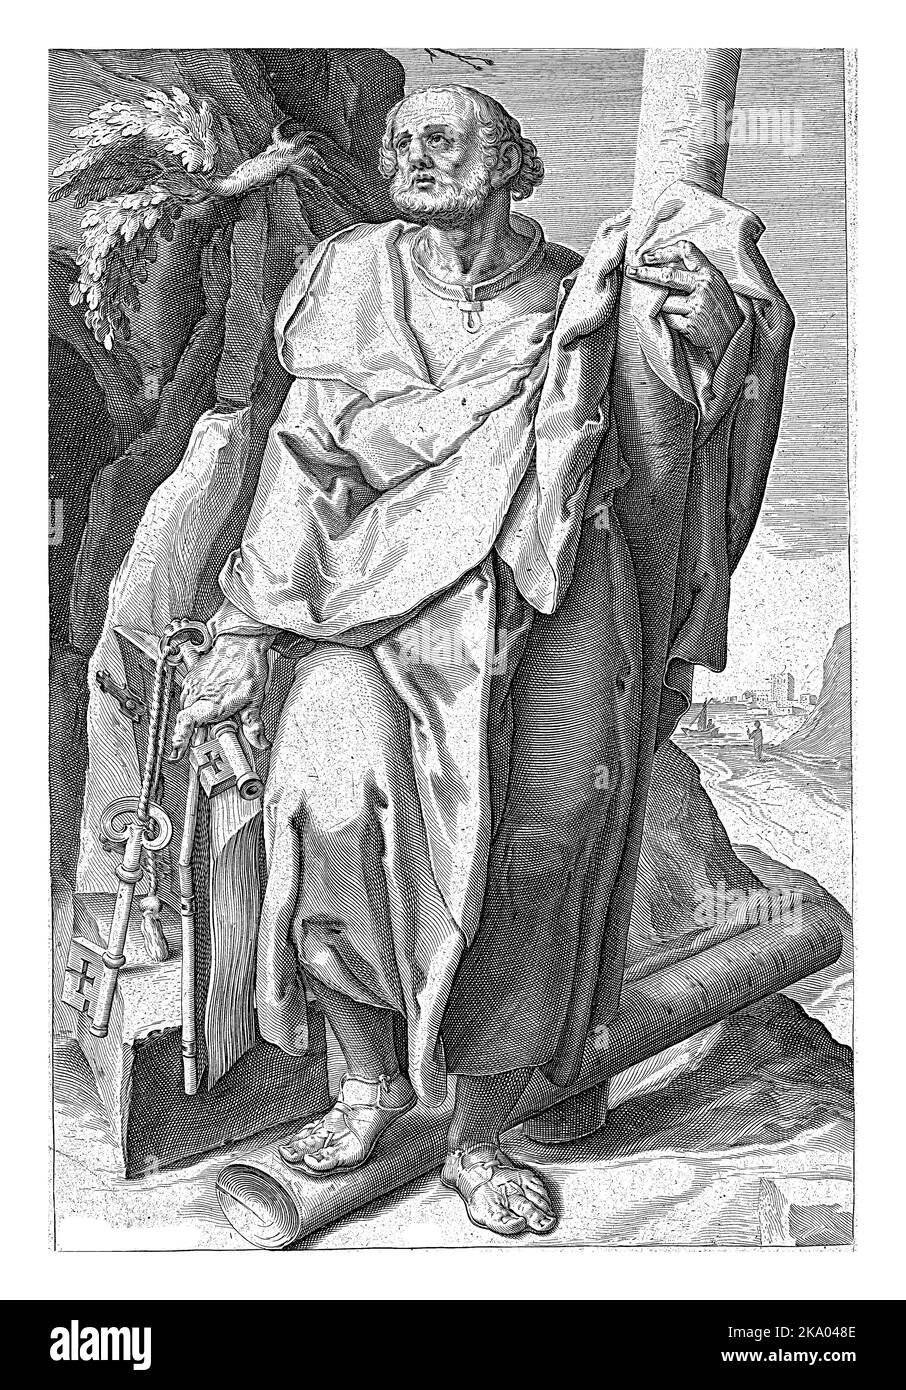 The apostle Peter, standing in a rocky environment near a shore, two keys and a book in the right hand, a cross in the left arm, the left foot resting Stock Photo